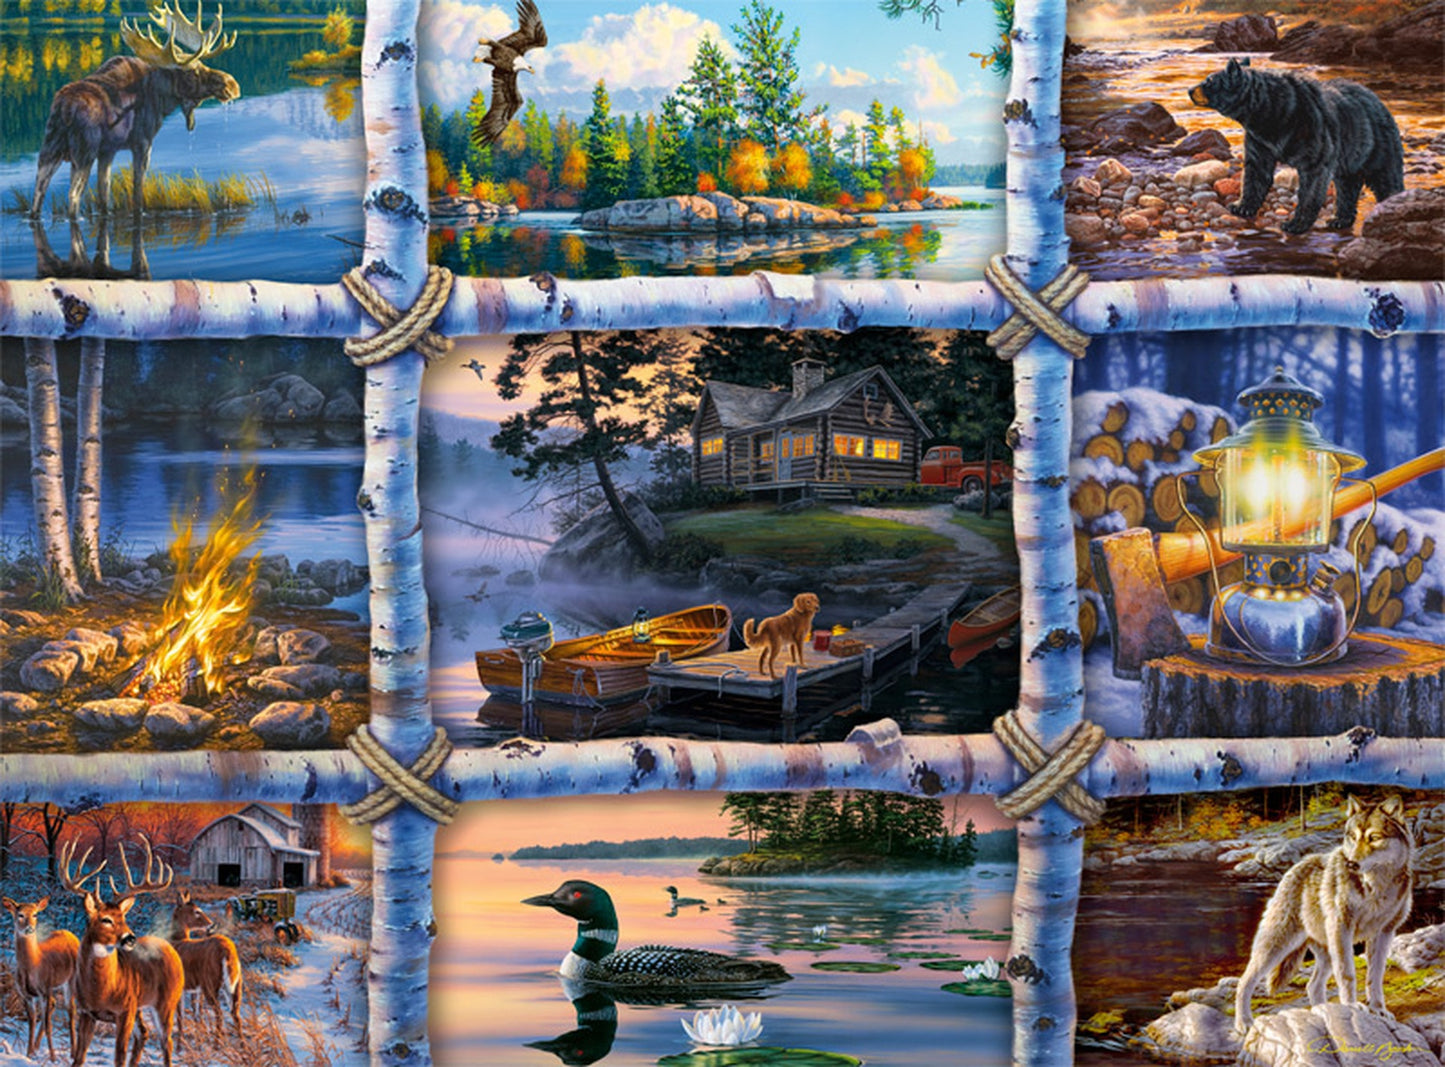 North Country 1000 Piece Puzzle